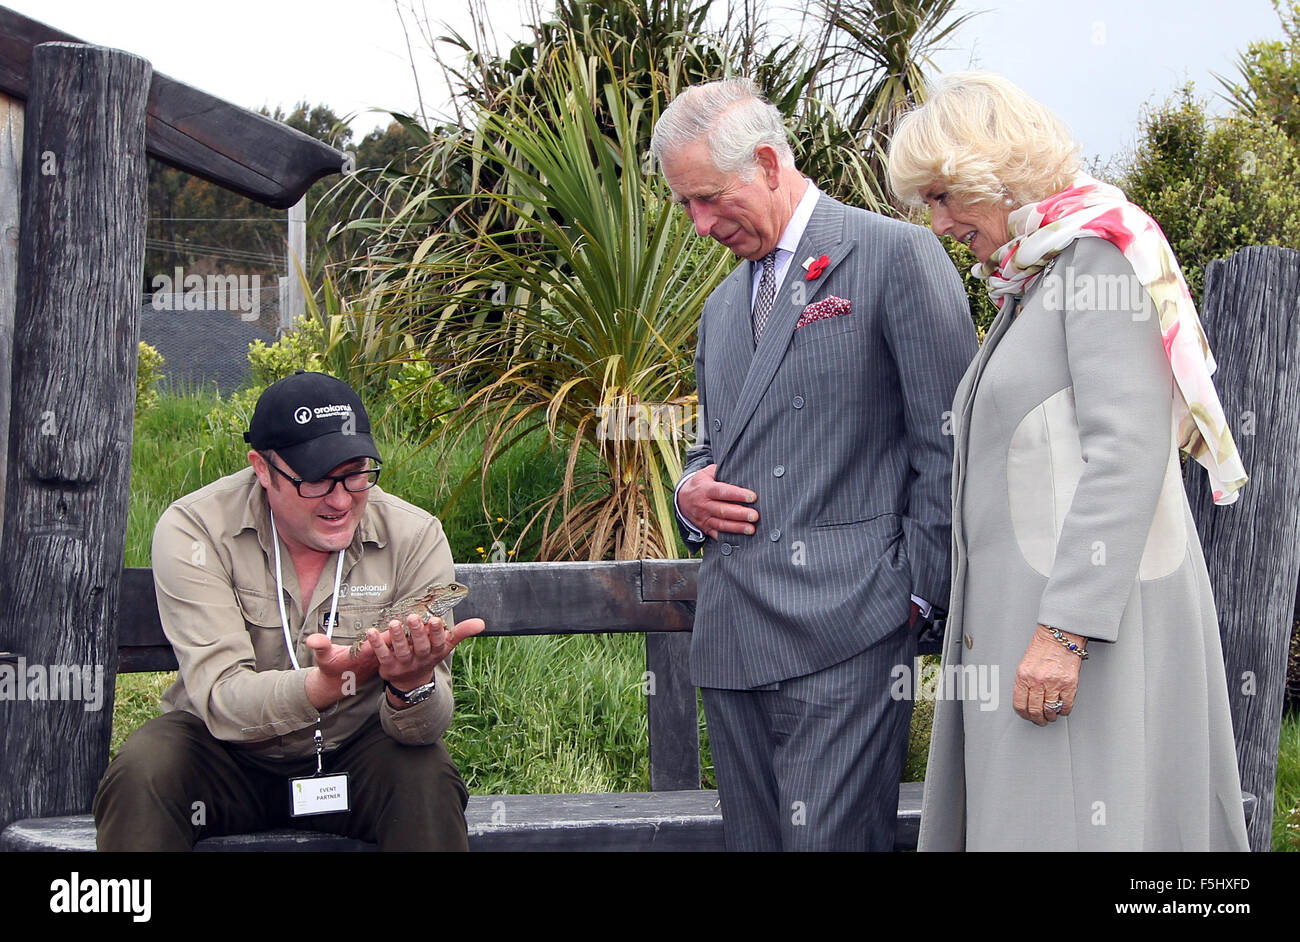 Dunedin, New Zealand - November 5, 2015 - Prince Charles, Prince of Wales, and Camilla, Duchess of Cornwall, look after a Tuatara during their visit to the Orokonui Ecosanctuary on November 5, 2015 in Dunedin, New Zealand. Charles and Camilla visit New Zealand from November 4 to November 10 attending events in Wellington, Dunedin, Nelson, Westport, Ngaruawahia, Auckland and New Plymouth. Credit:  dpa picture alliance/Alamy Live News Stock Photo